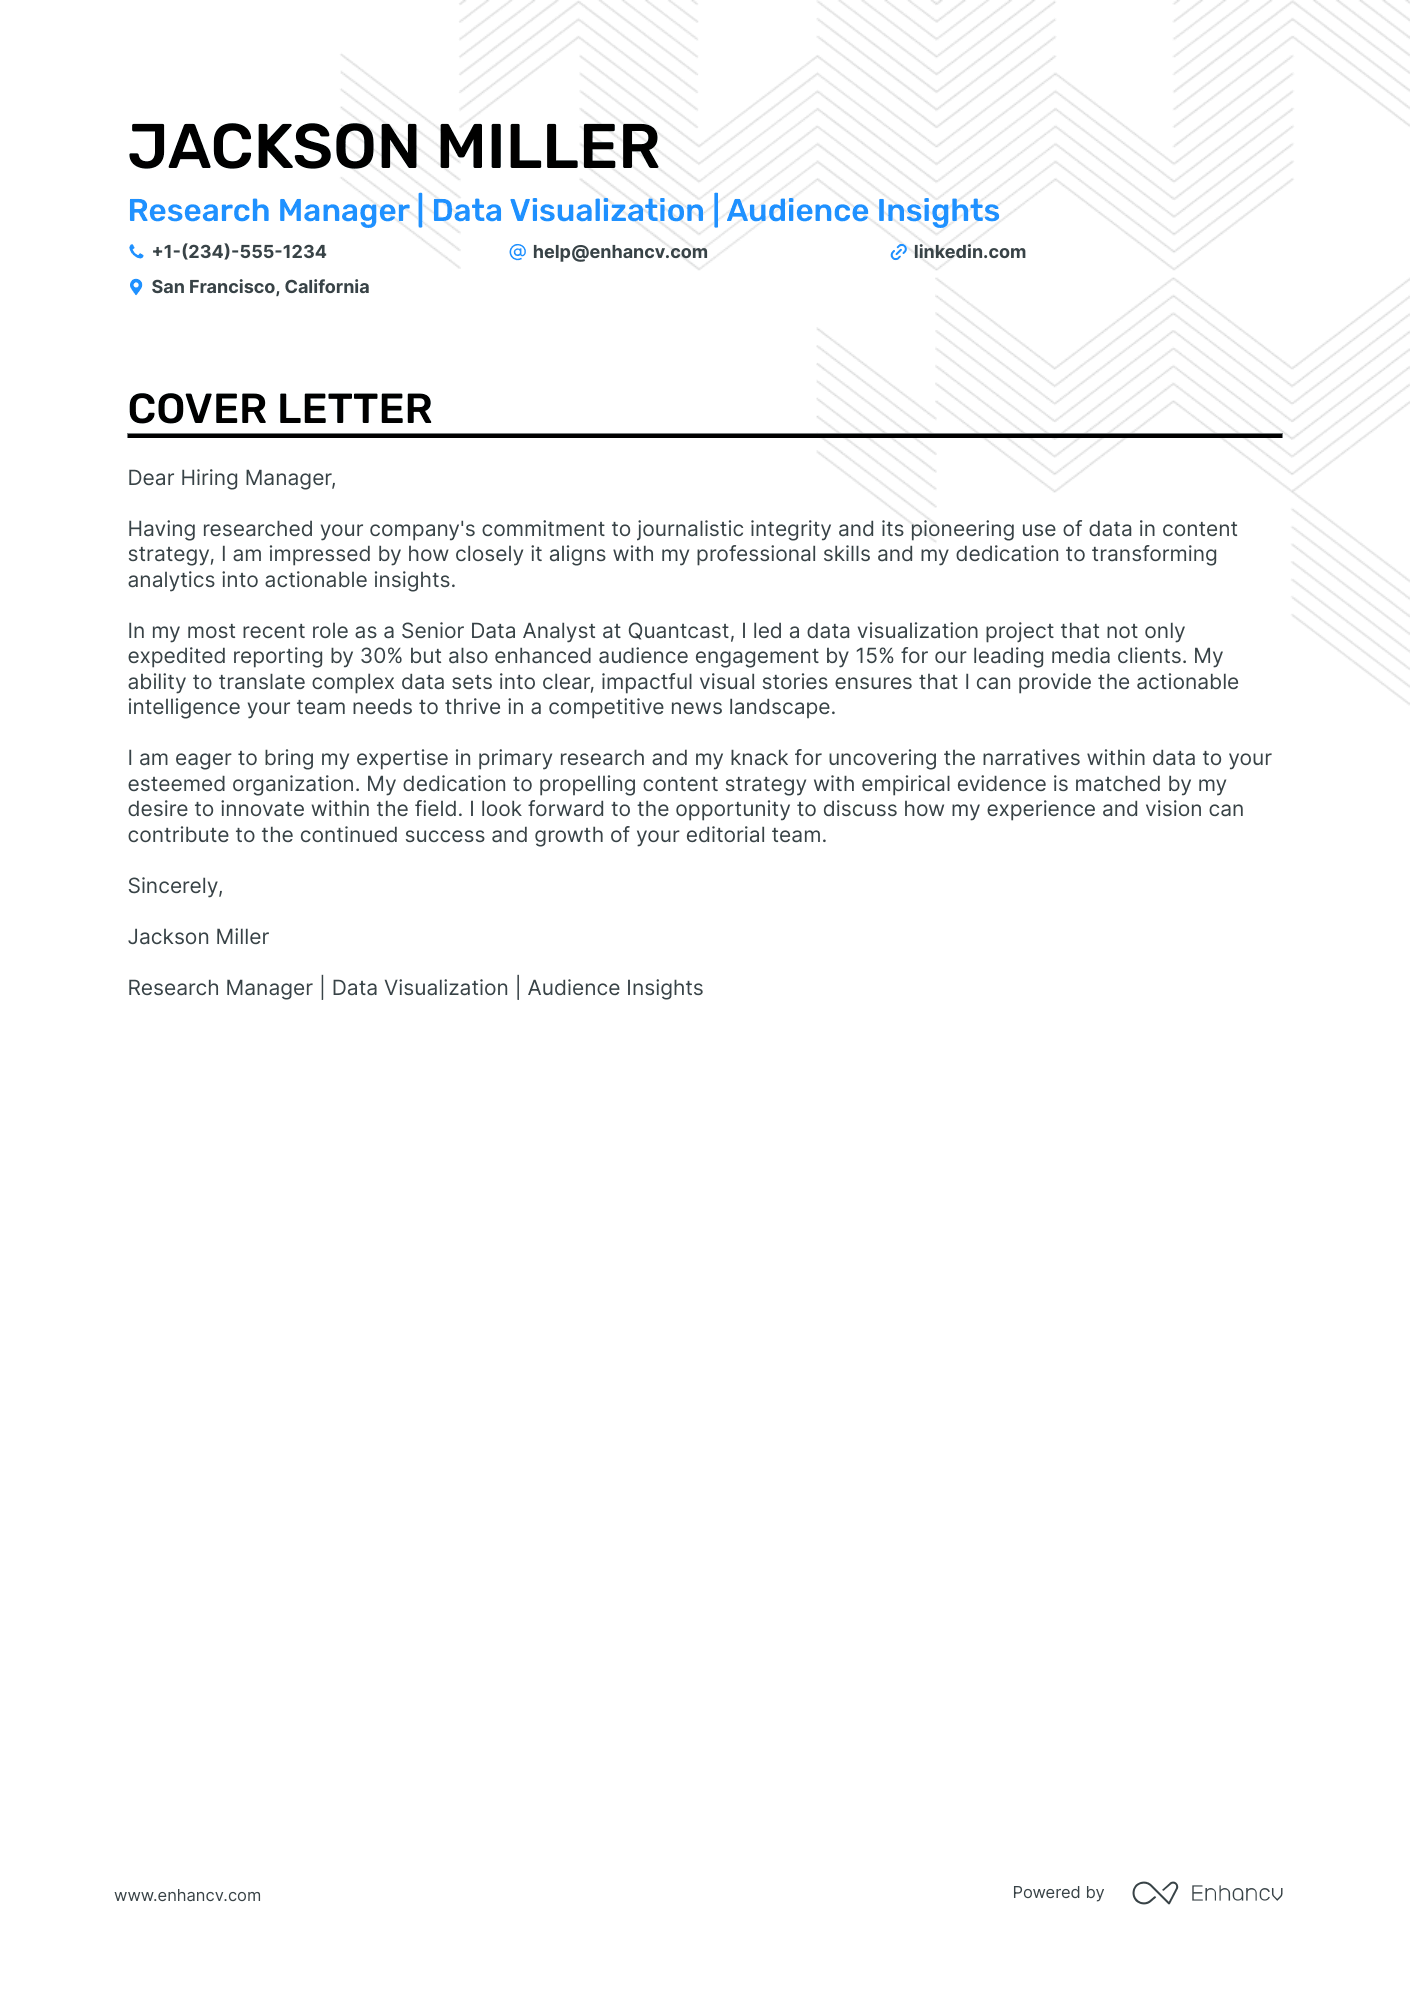 example cover letter for research assistant position